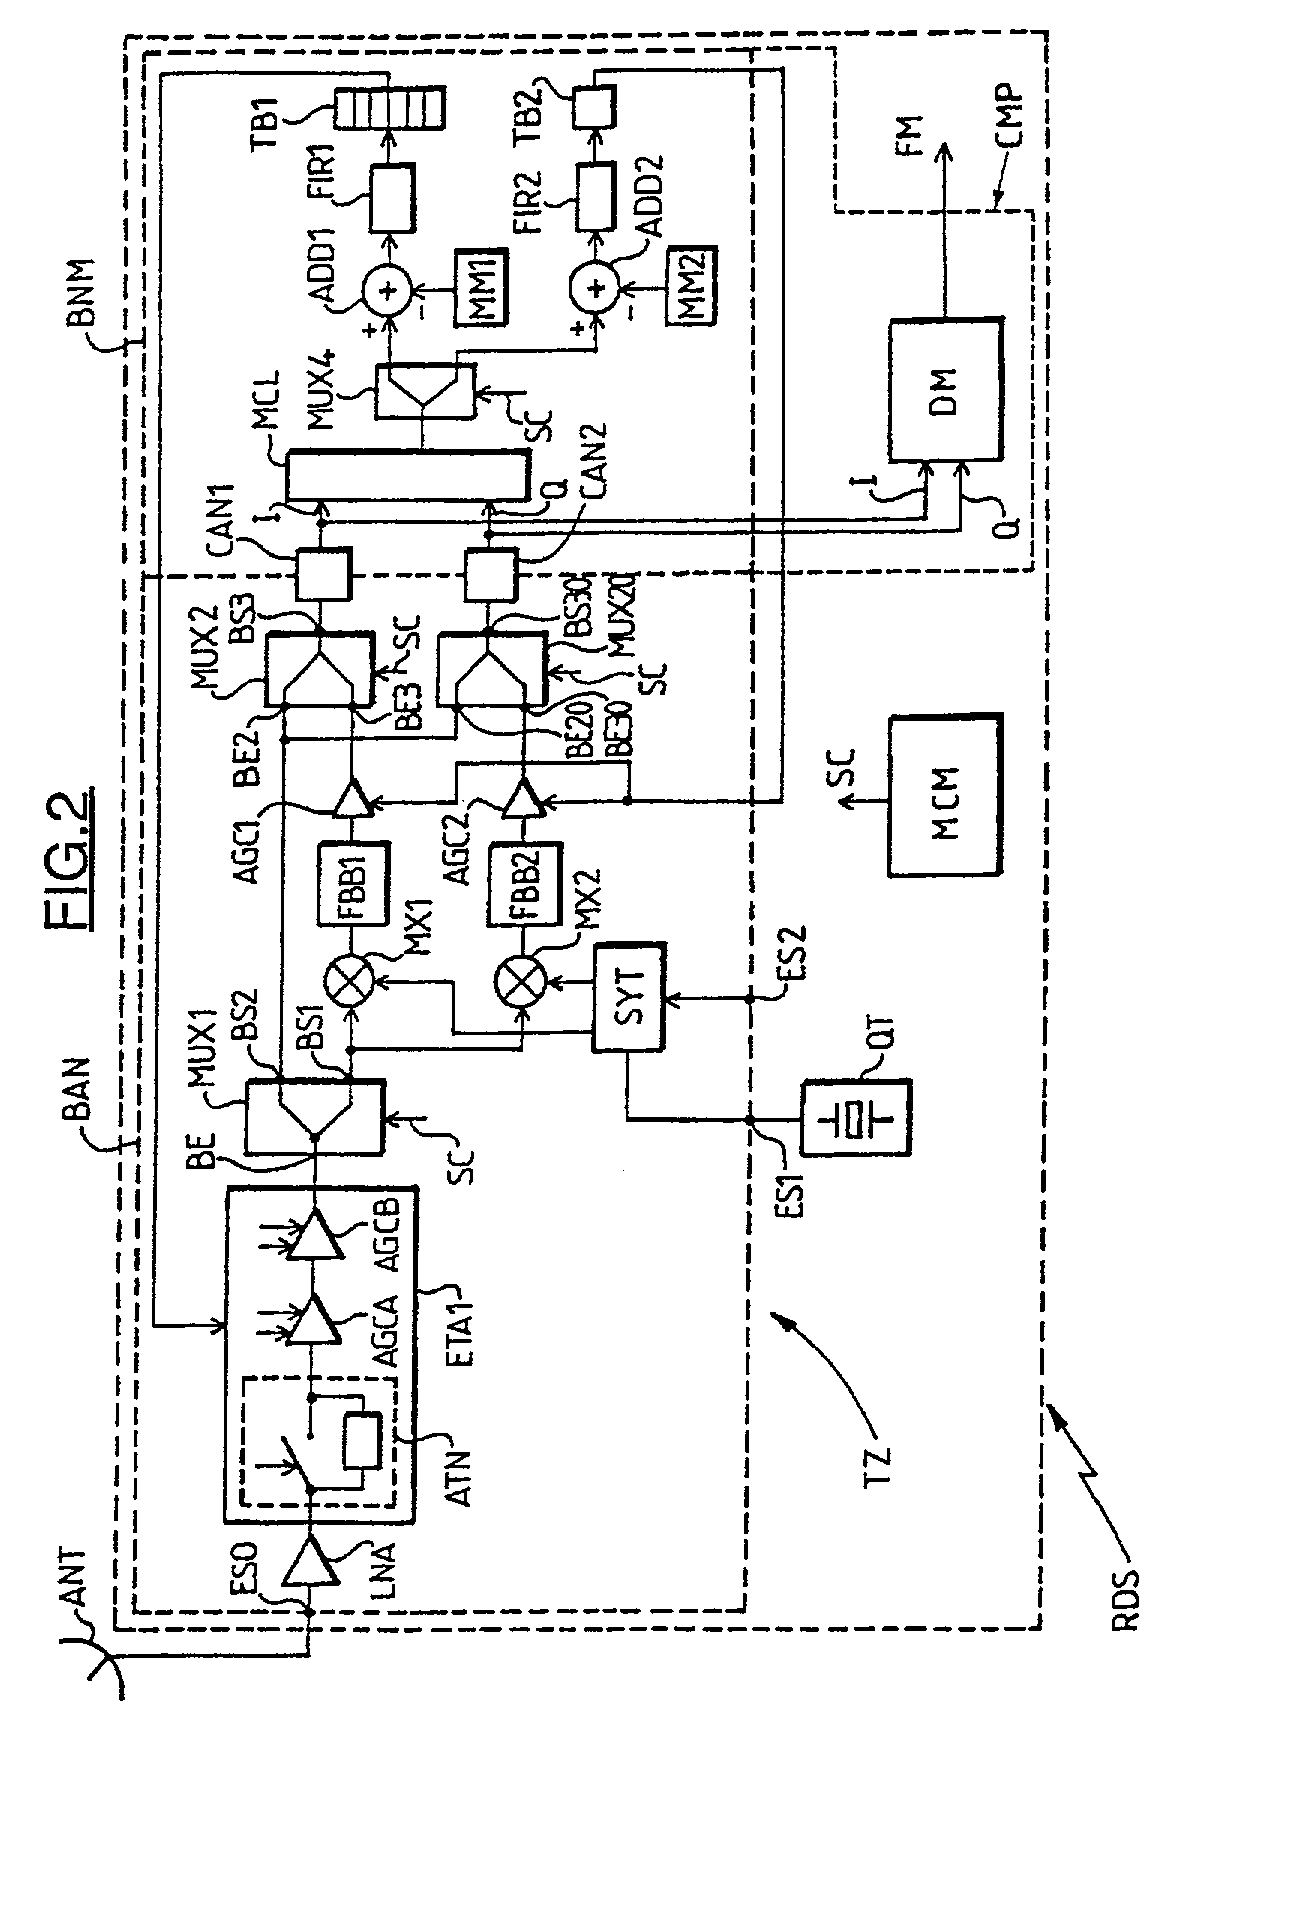 Electronic component allowing the decoding of a radiofrequency transmission channel conveying coded digital information, in particular for satellite digital telebroadcasting